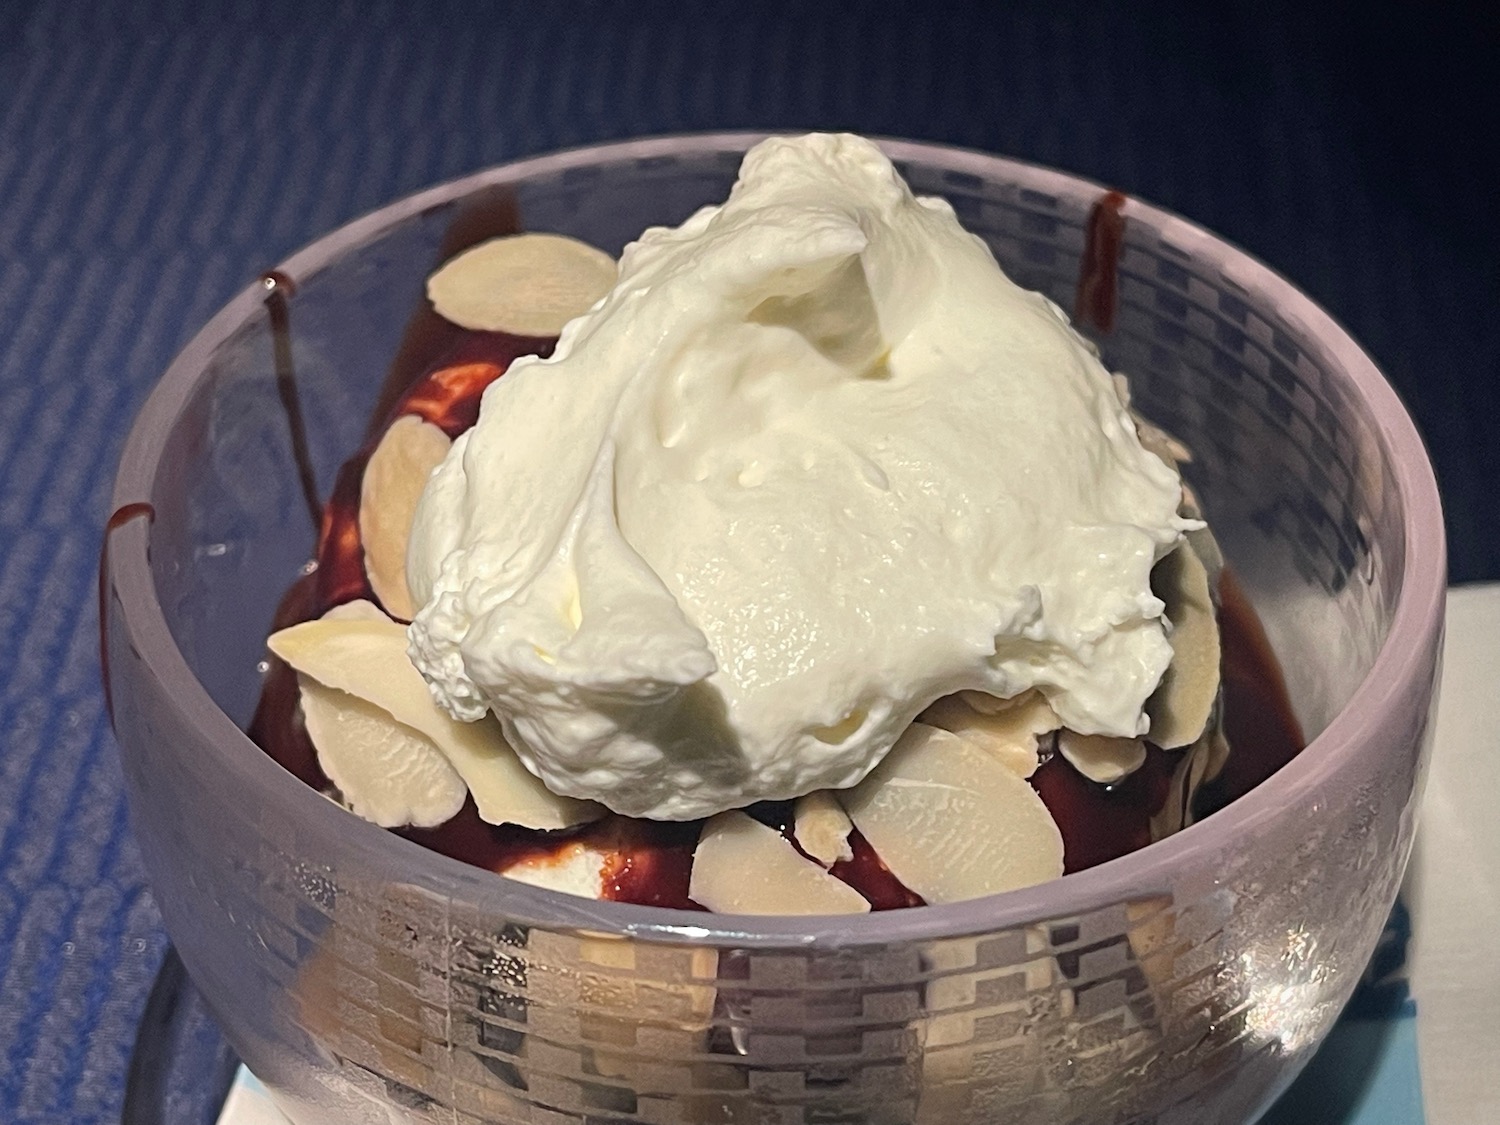 a bowl of ice cream with almonds and chocolate sauce